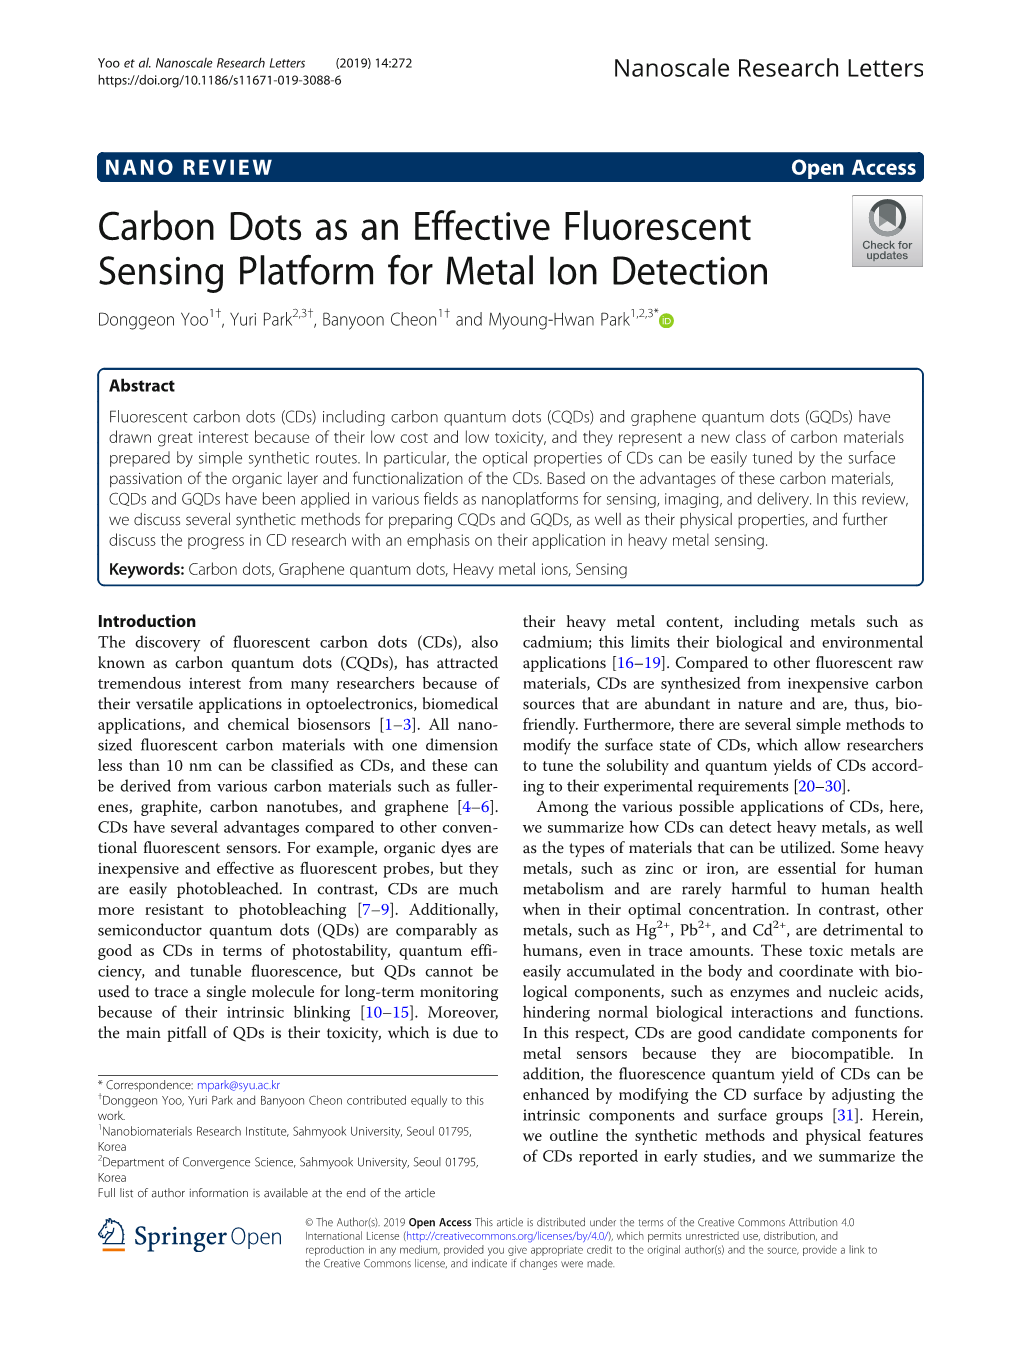 Carbon Dots As an Effective Fluorescent Sensing Platform for Metal Ion Detection Donggeon Yoo1†, Yuri Park2,3†, Banyoon Cheon1† and Myoung-Hwan Park1,2,3*